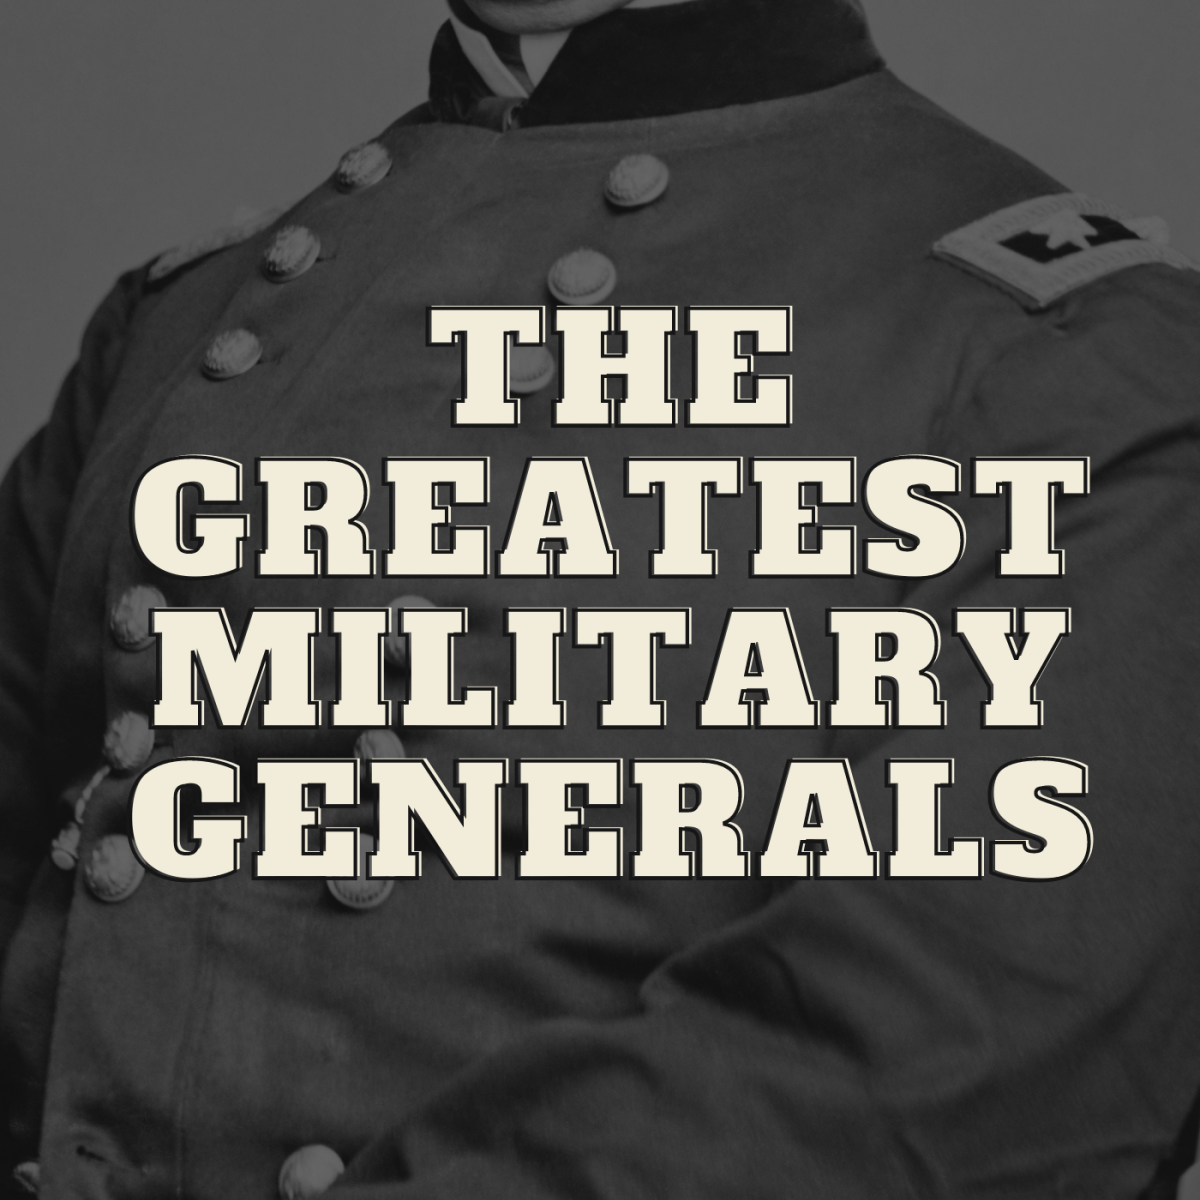 Ten of the greatest military generals